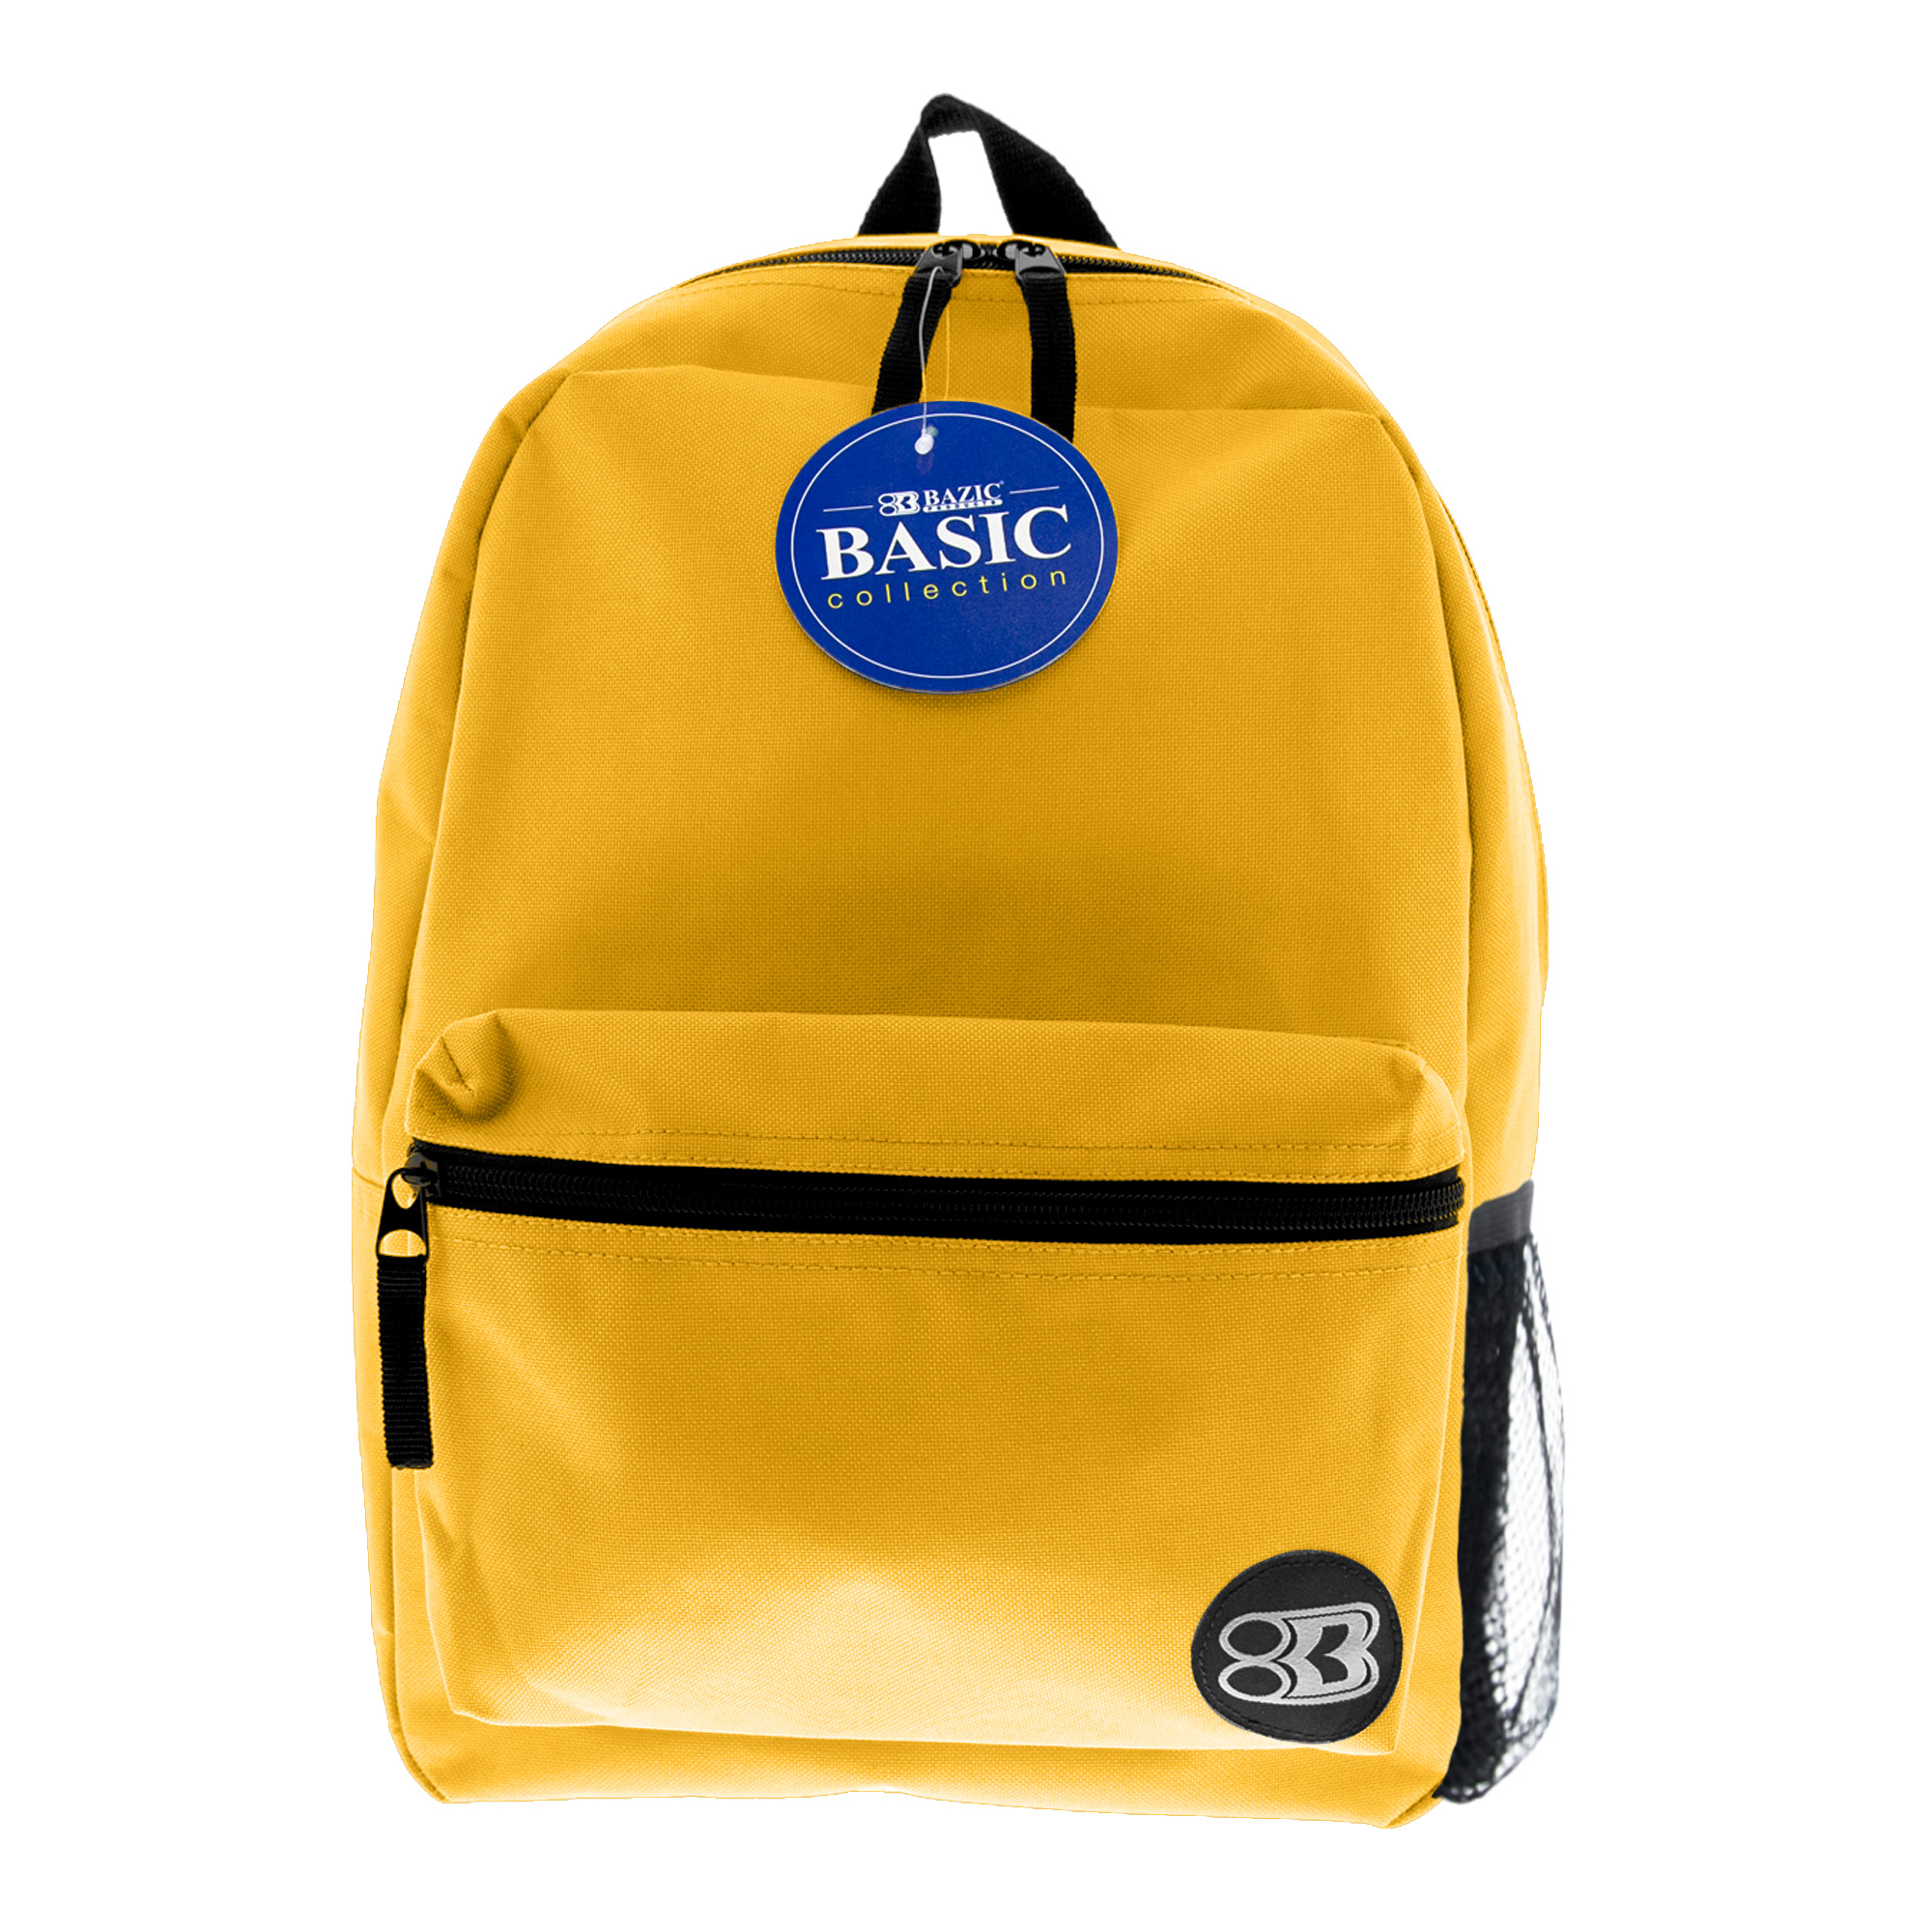 BAZIC School Backpack Basic 16" Mustard, School Bag for Students, 1-Pack - image 1 of 7